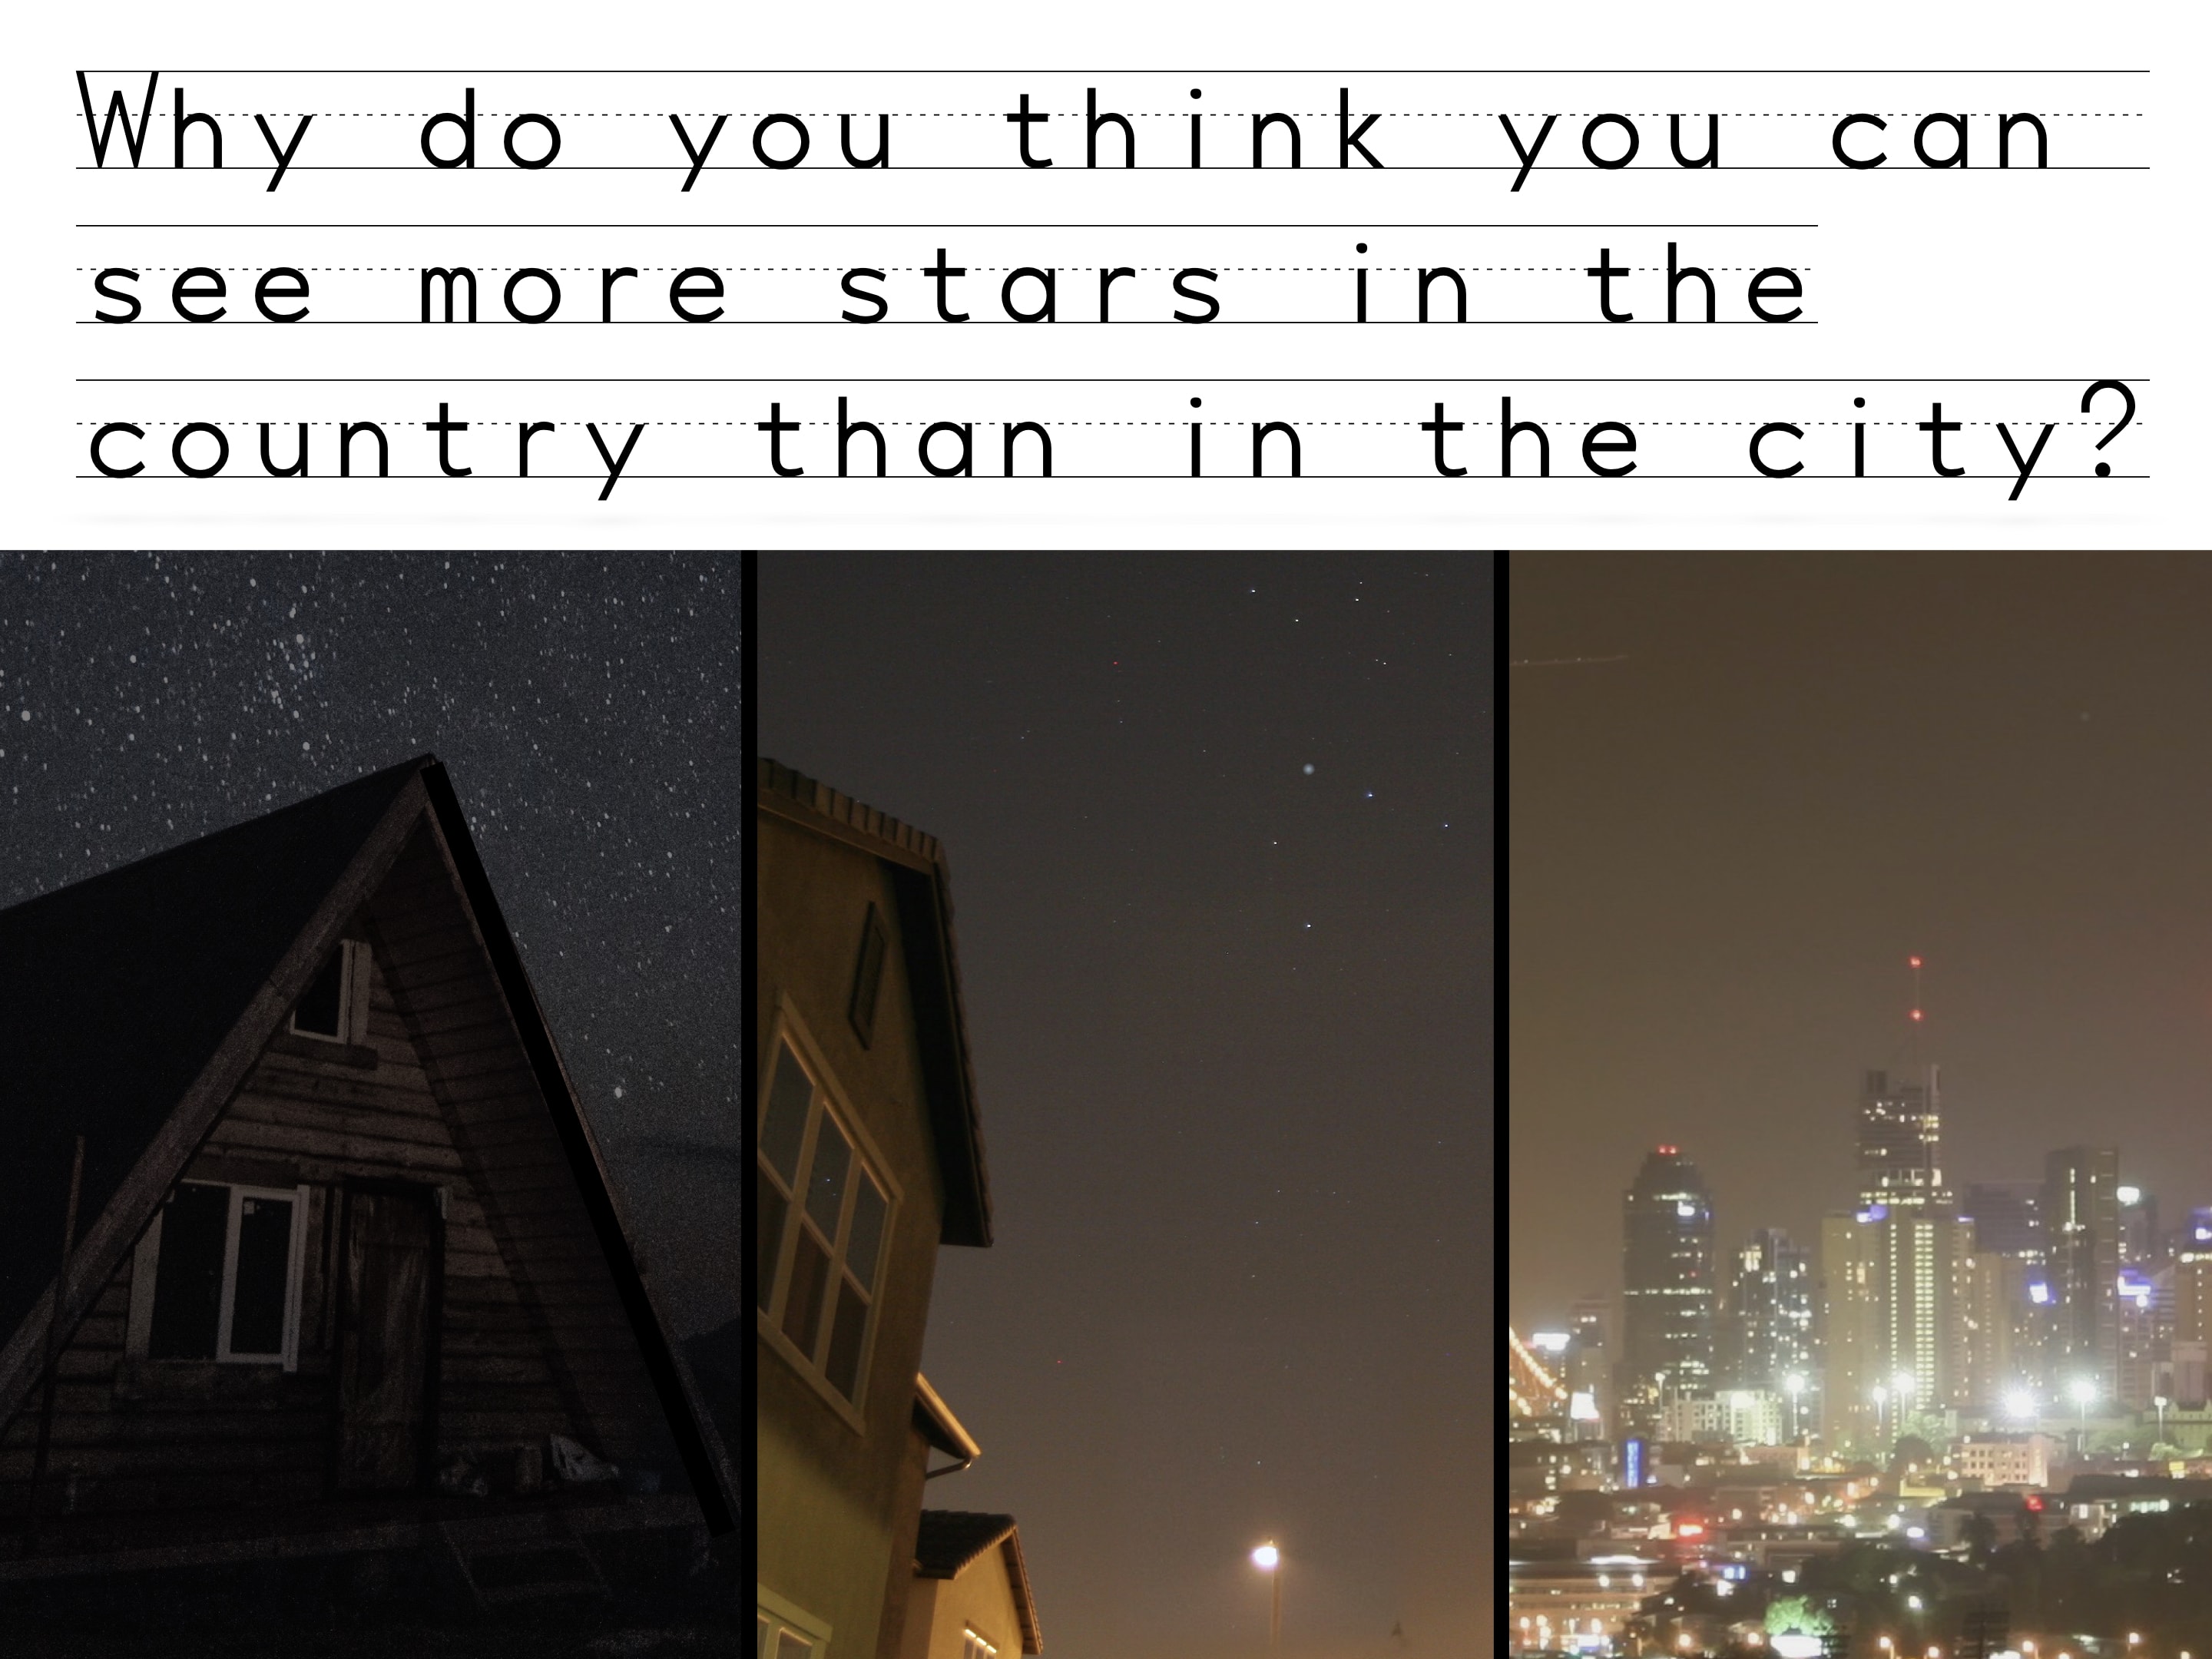 Stars in the country vs city